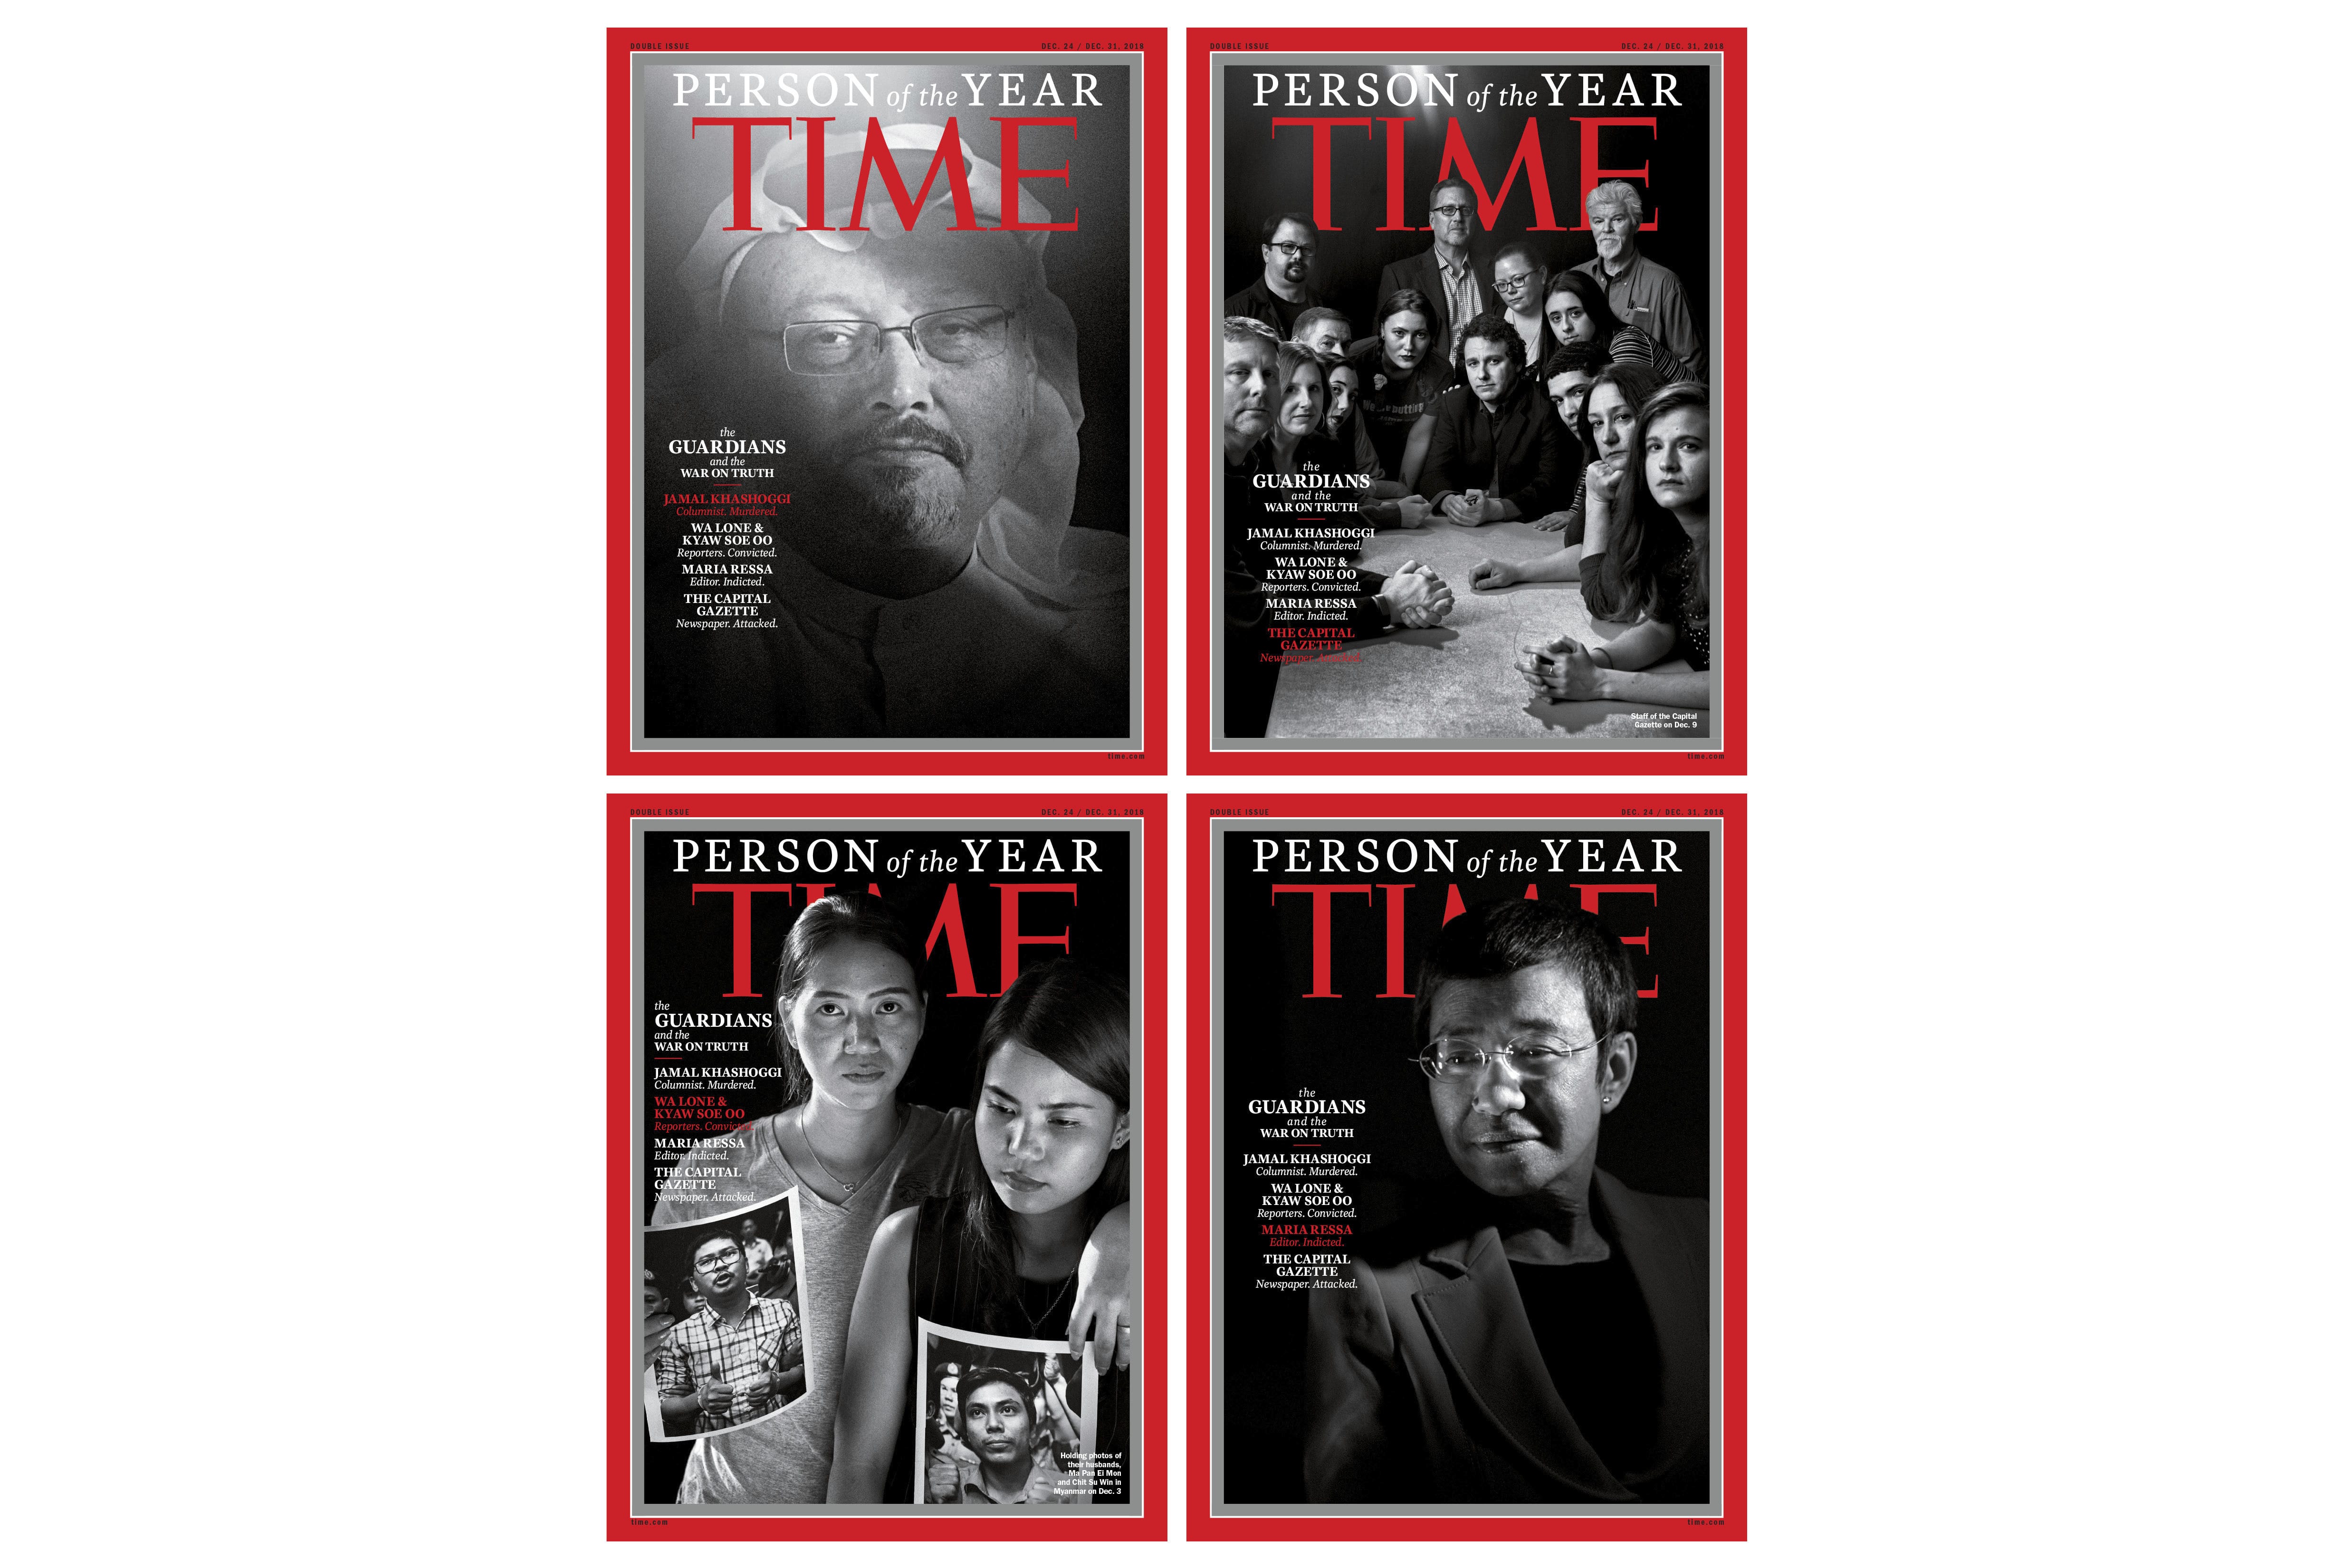 This combination photo provided by Time Magazine shows their four covers for the "Person of the Year," announced Tuesday, Dec. 11, 2018. The covers show Jamal Khashoggi, top left, members of the Capital Gazette newspaper, of Annapolis, Md., top right, Wa Lone and Kyaw Soe Oo, bottom left, and Maria Ressa.